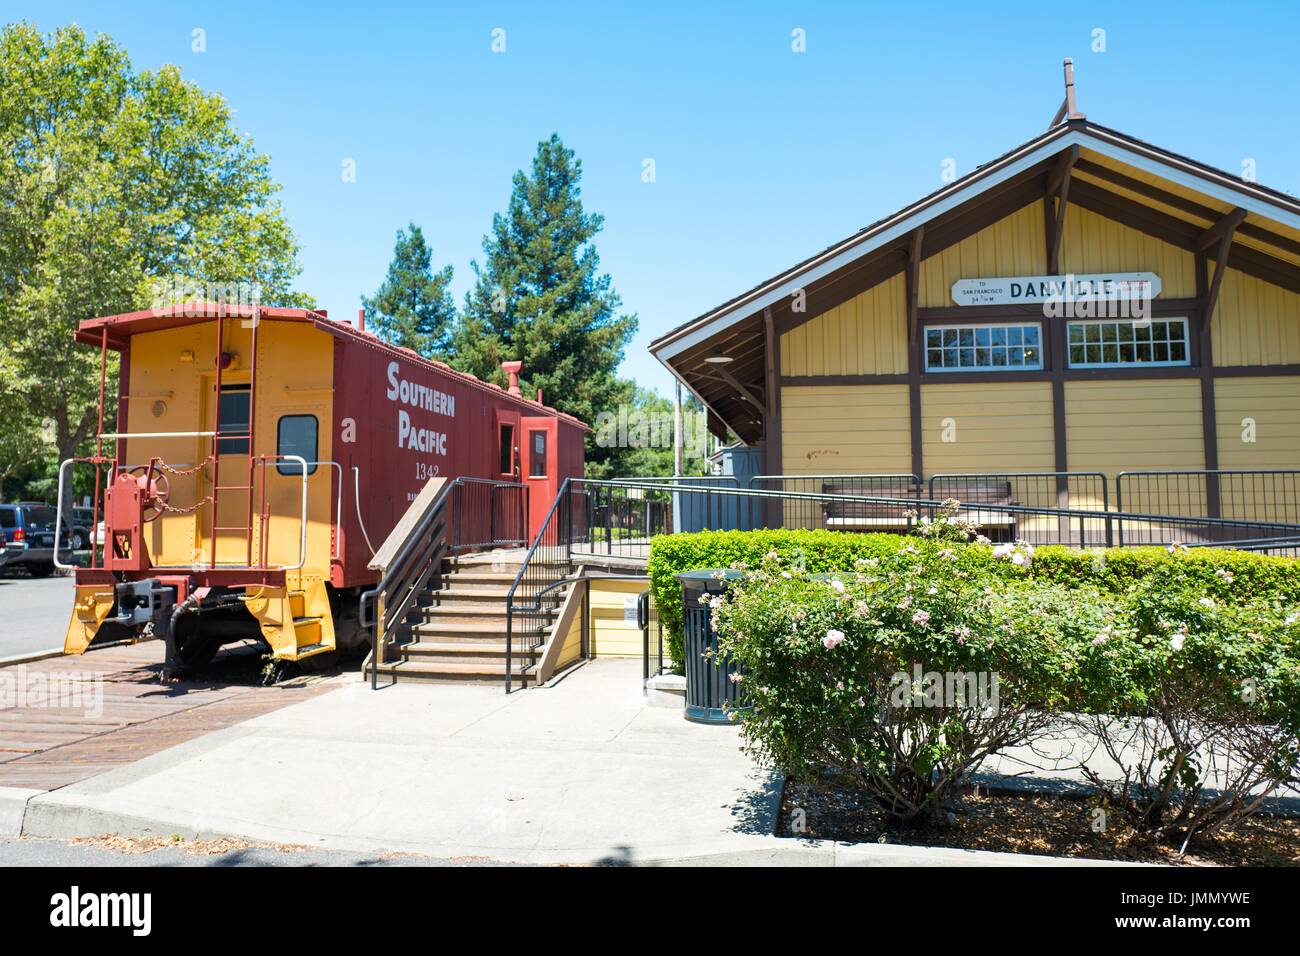 A Southern Pacific railroad caboose is parked on a short section of track outside the Museum of the San Ramon Valley, housed in a historical structure which used to serve as the rail depot for the city of Danville, California, June 27, 2017. Stock Photo